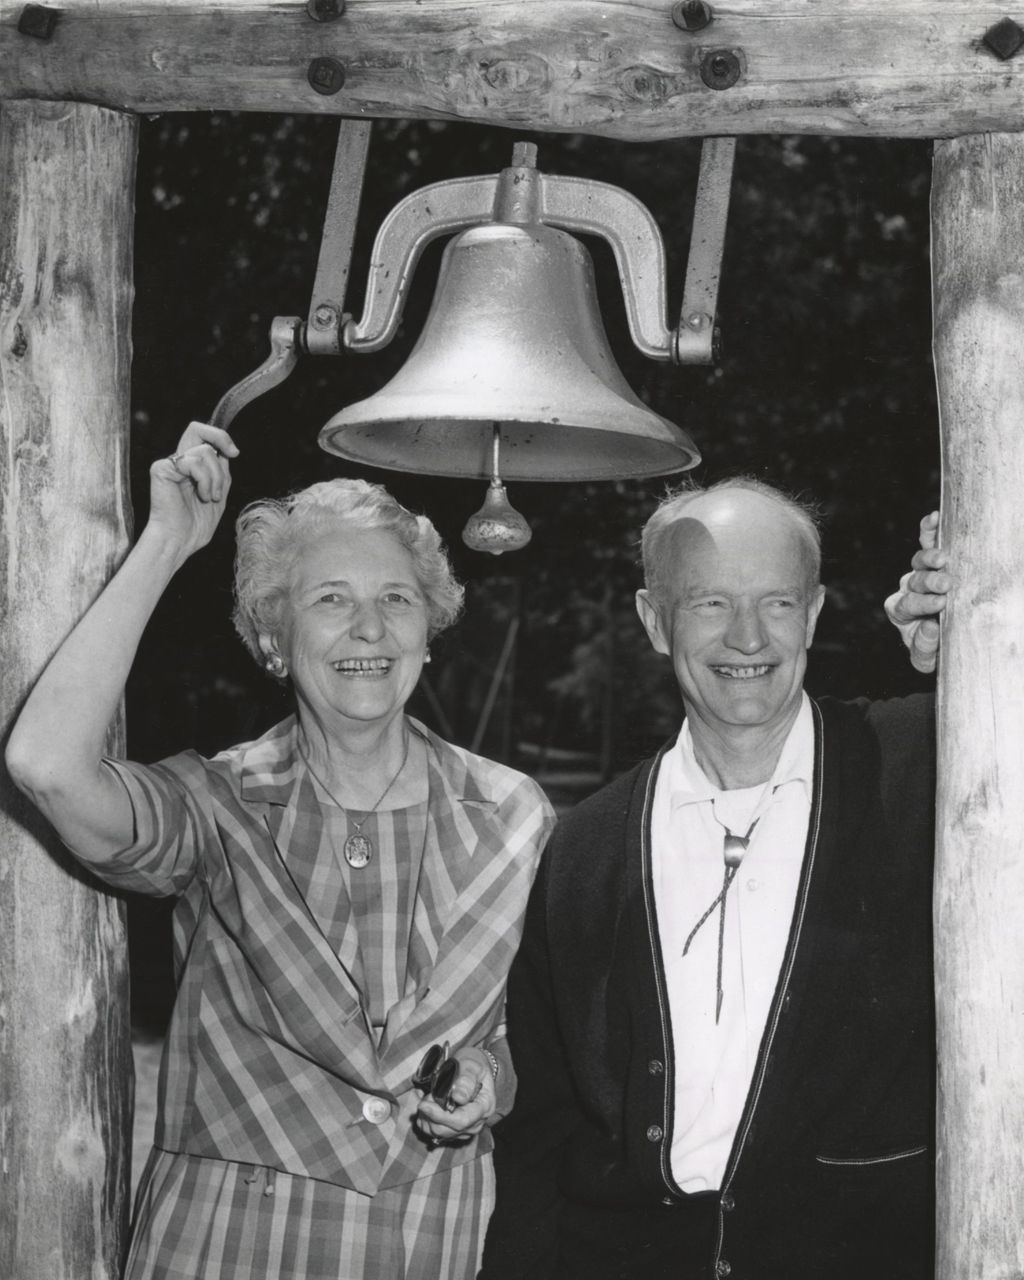 Ada Hicks and Robert Hicks, former co-directors of Bowen Country Club, standing under a bell during Bowen Country Club's 50th Anniversary celebration